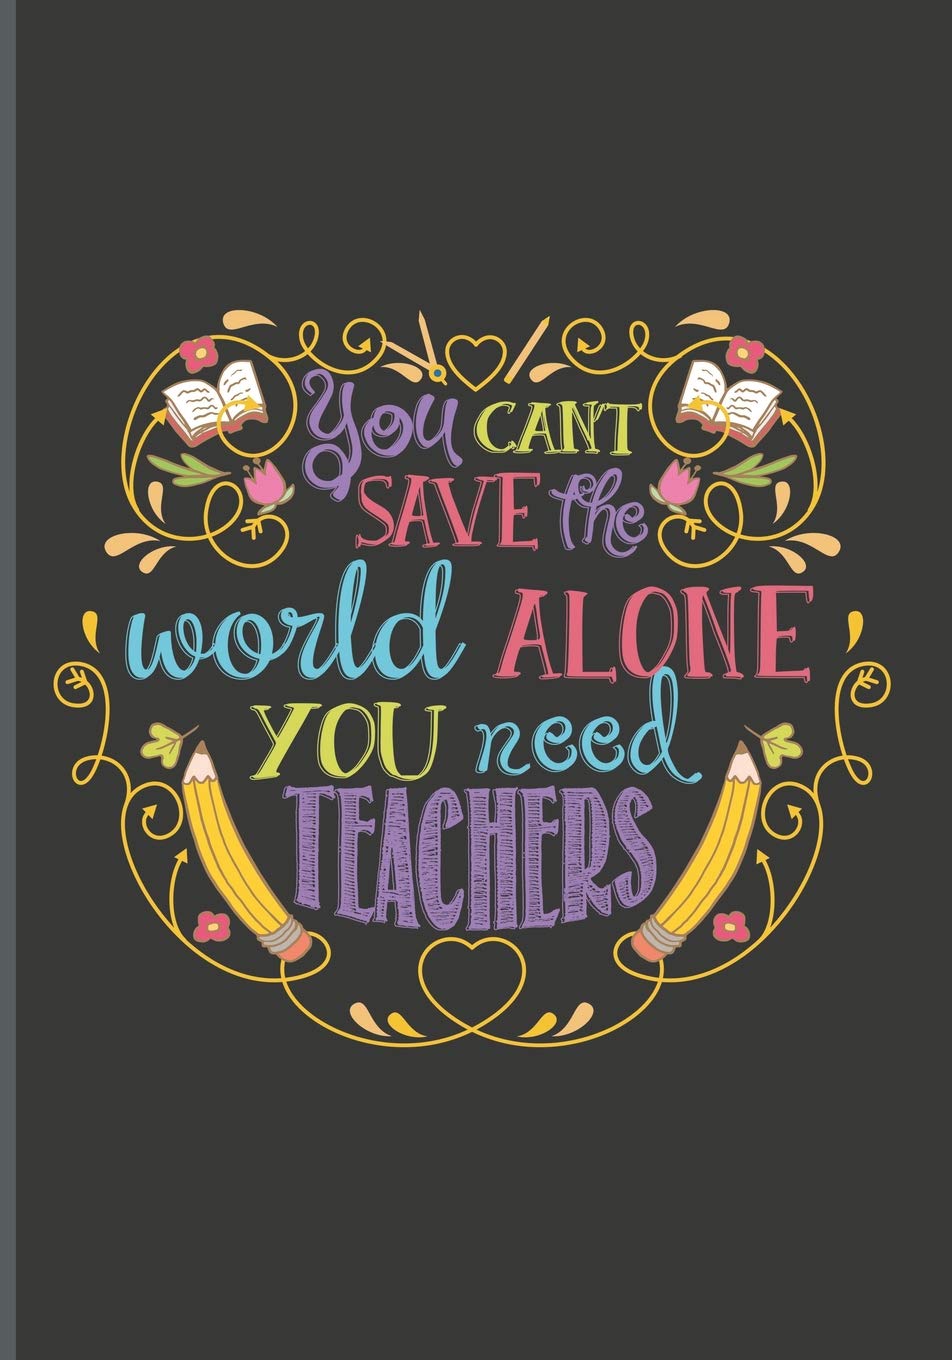 Buy You Can't Save the World Alone You Need Teachers: Teachers' Journal or Notebook for Motivational and Inspirational Writing Book Online at Low Prices in India. You Can't Save the World